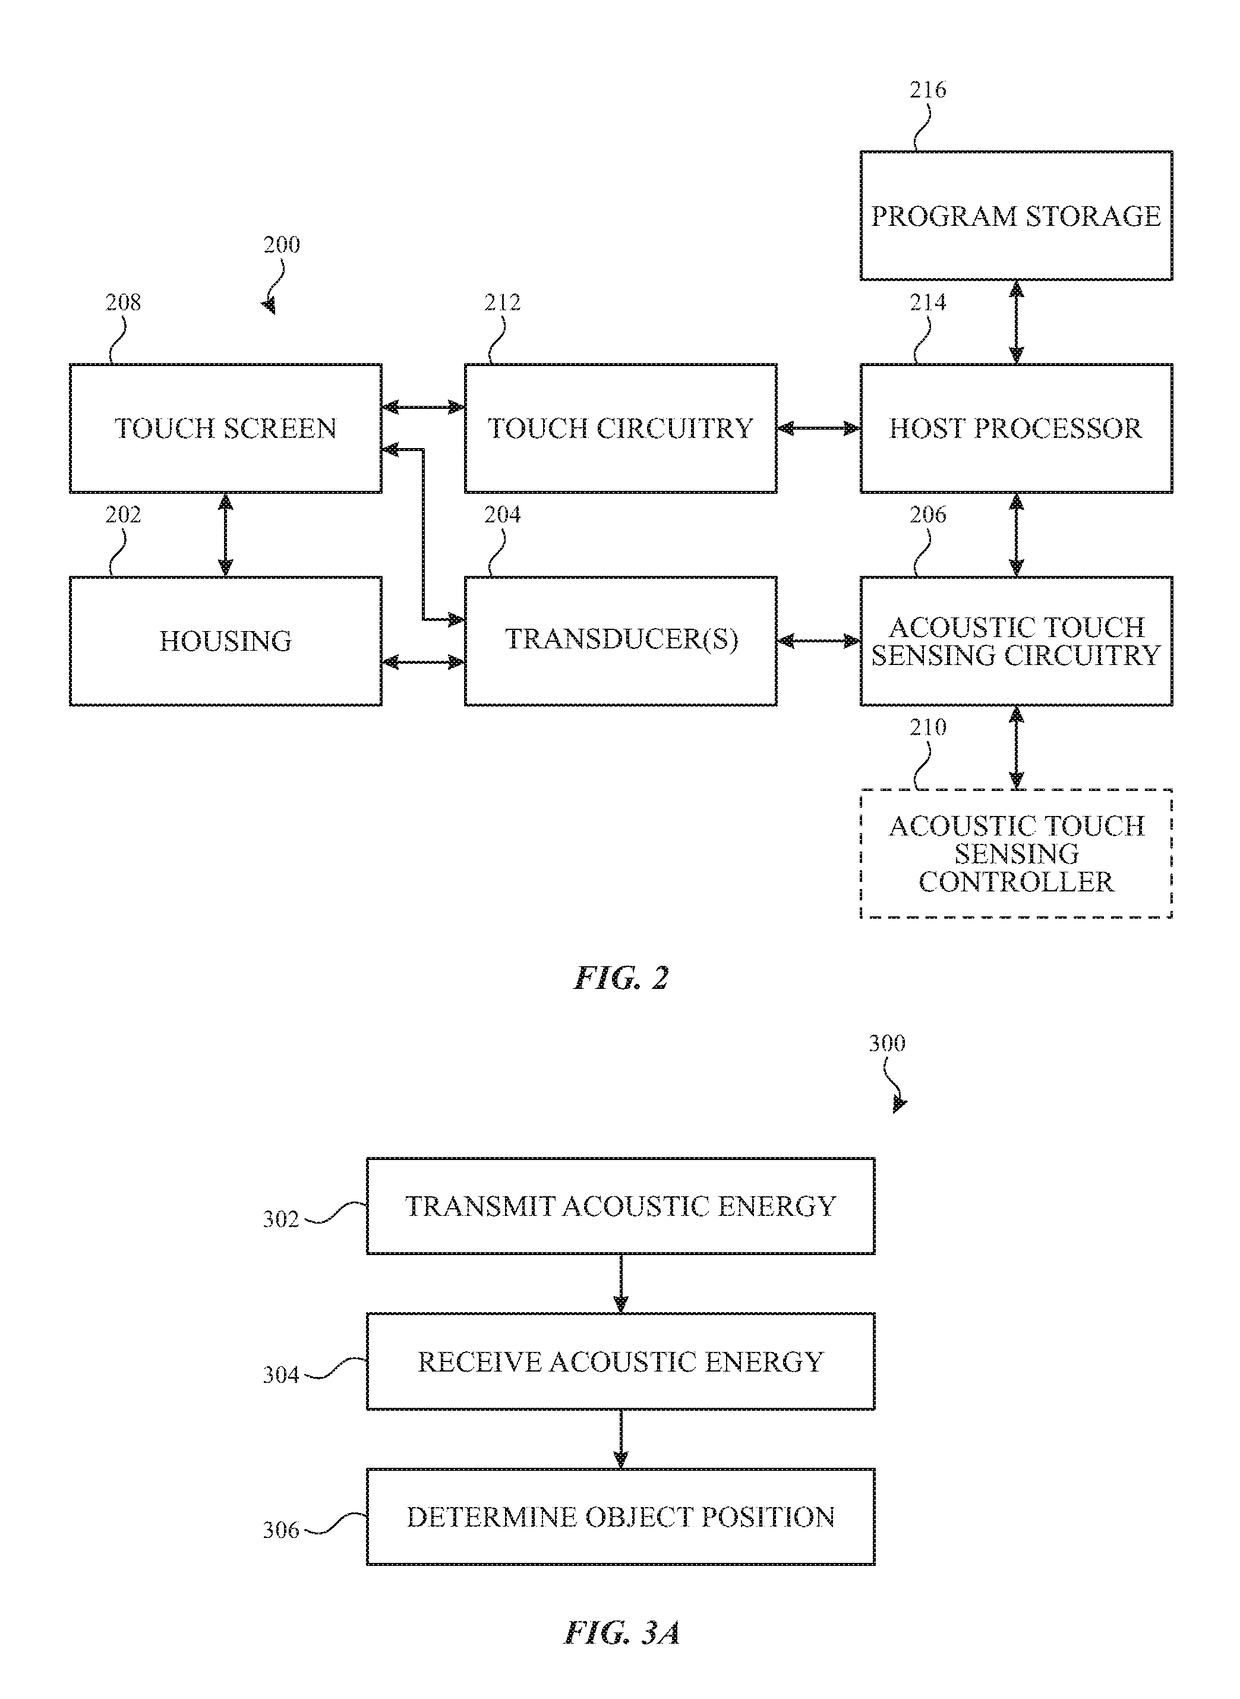 Methodology and application of acoustic touch detection